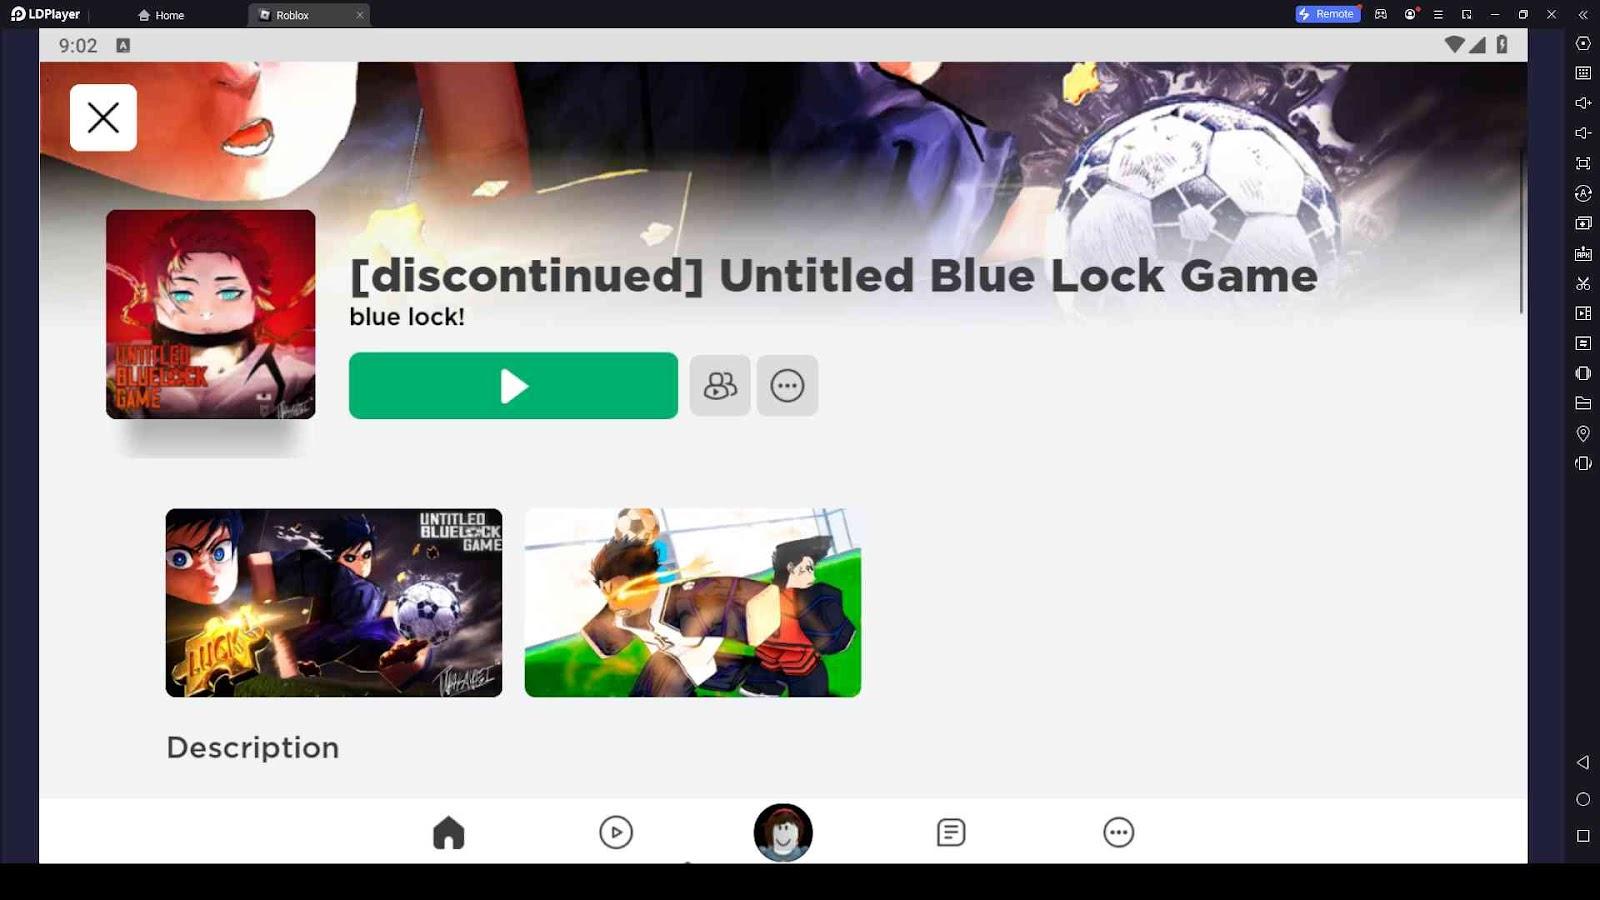 Untitled Blue Lock Game Codes In Roblox (2023) LATEST!